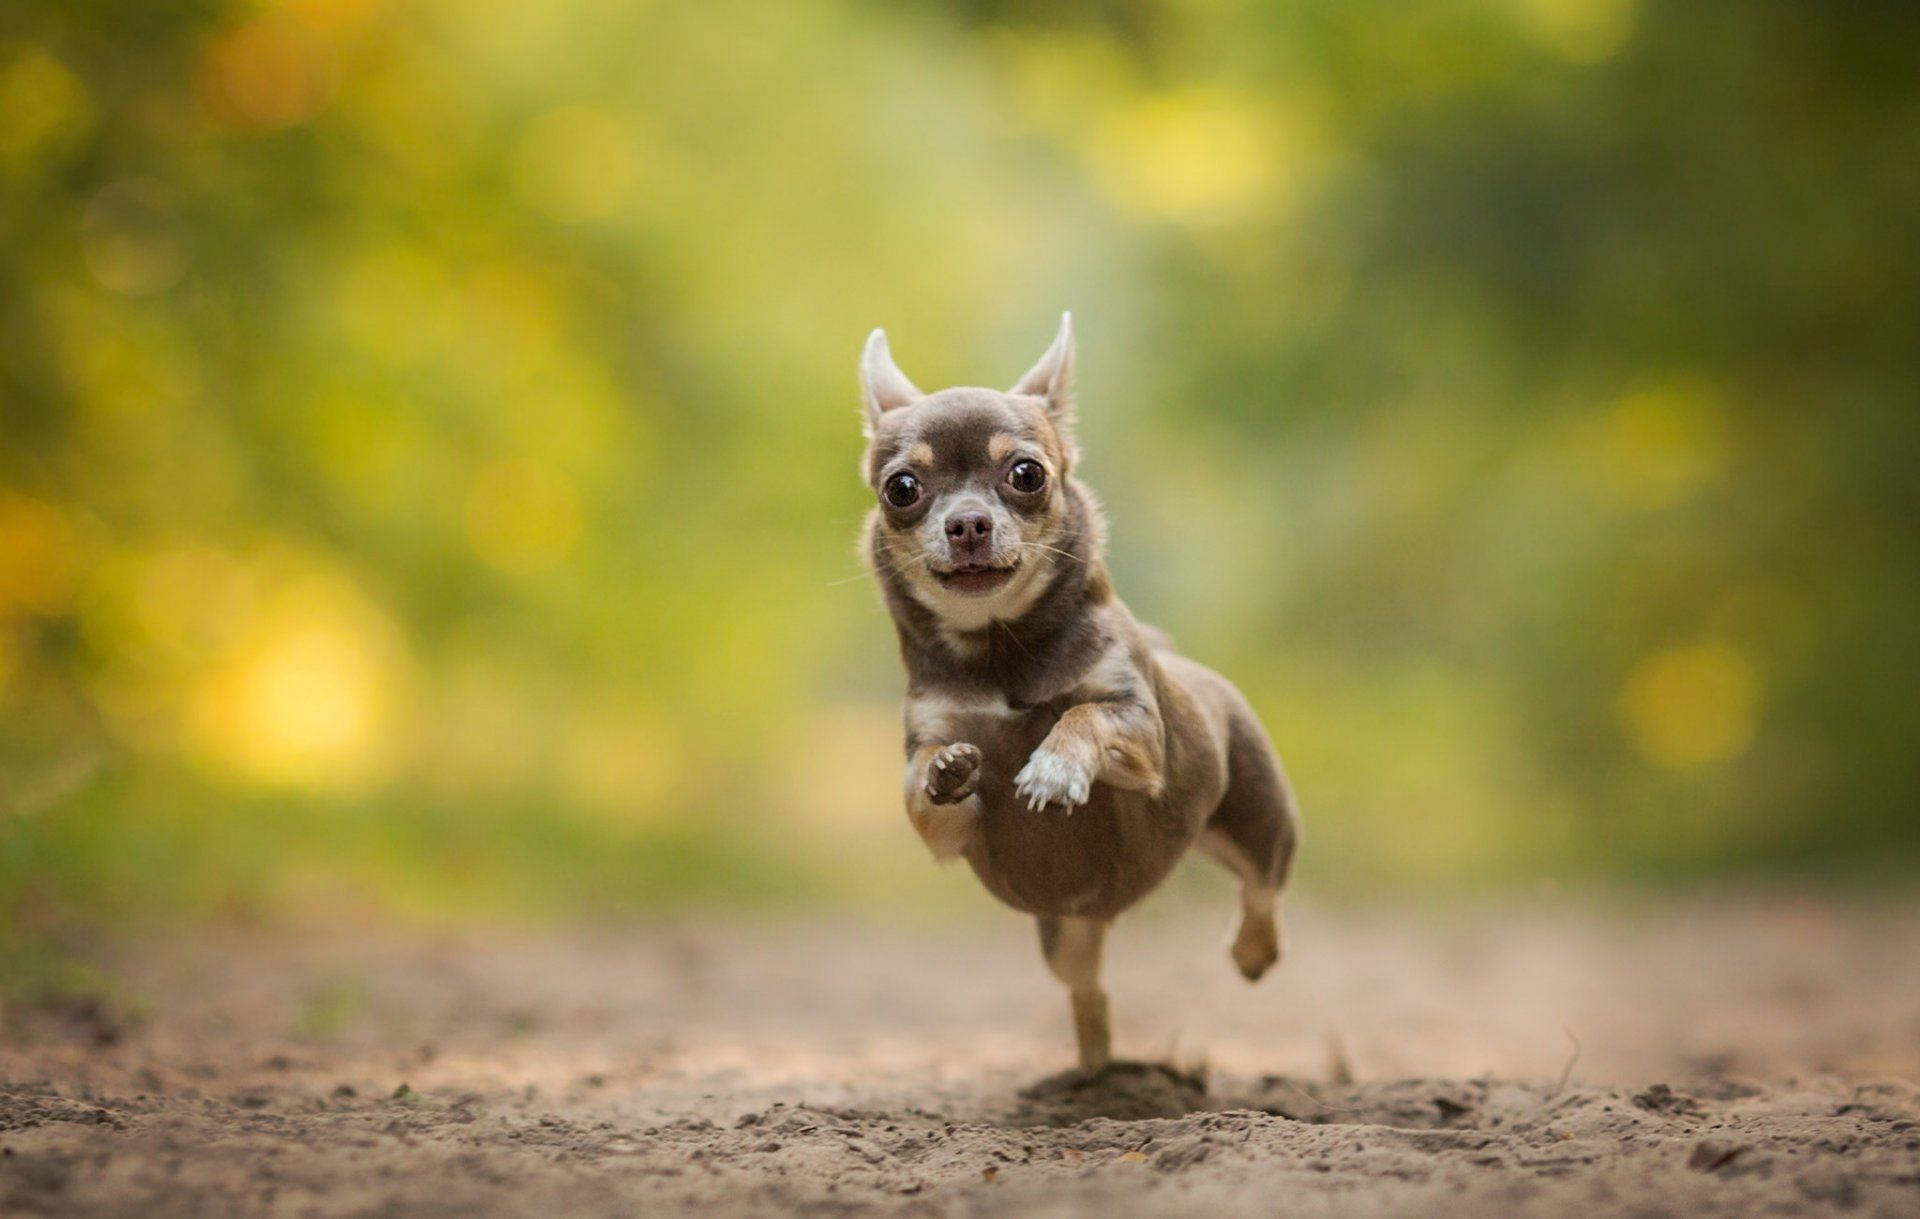 Chihuahua Puppy Running Photography Background